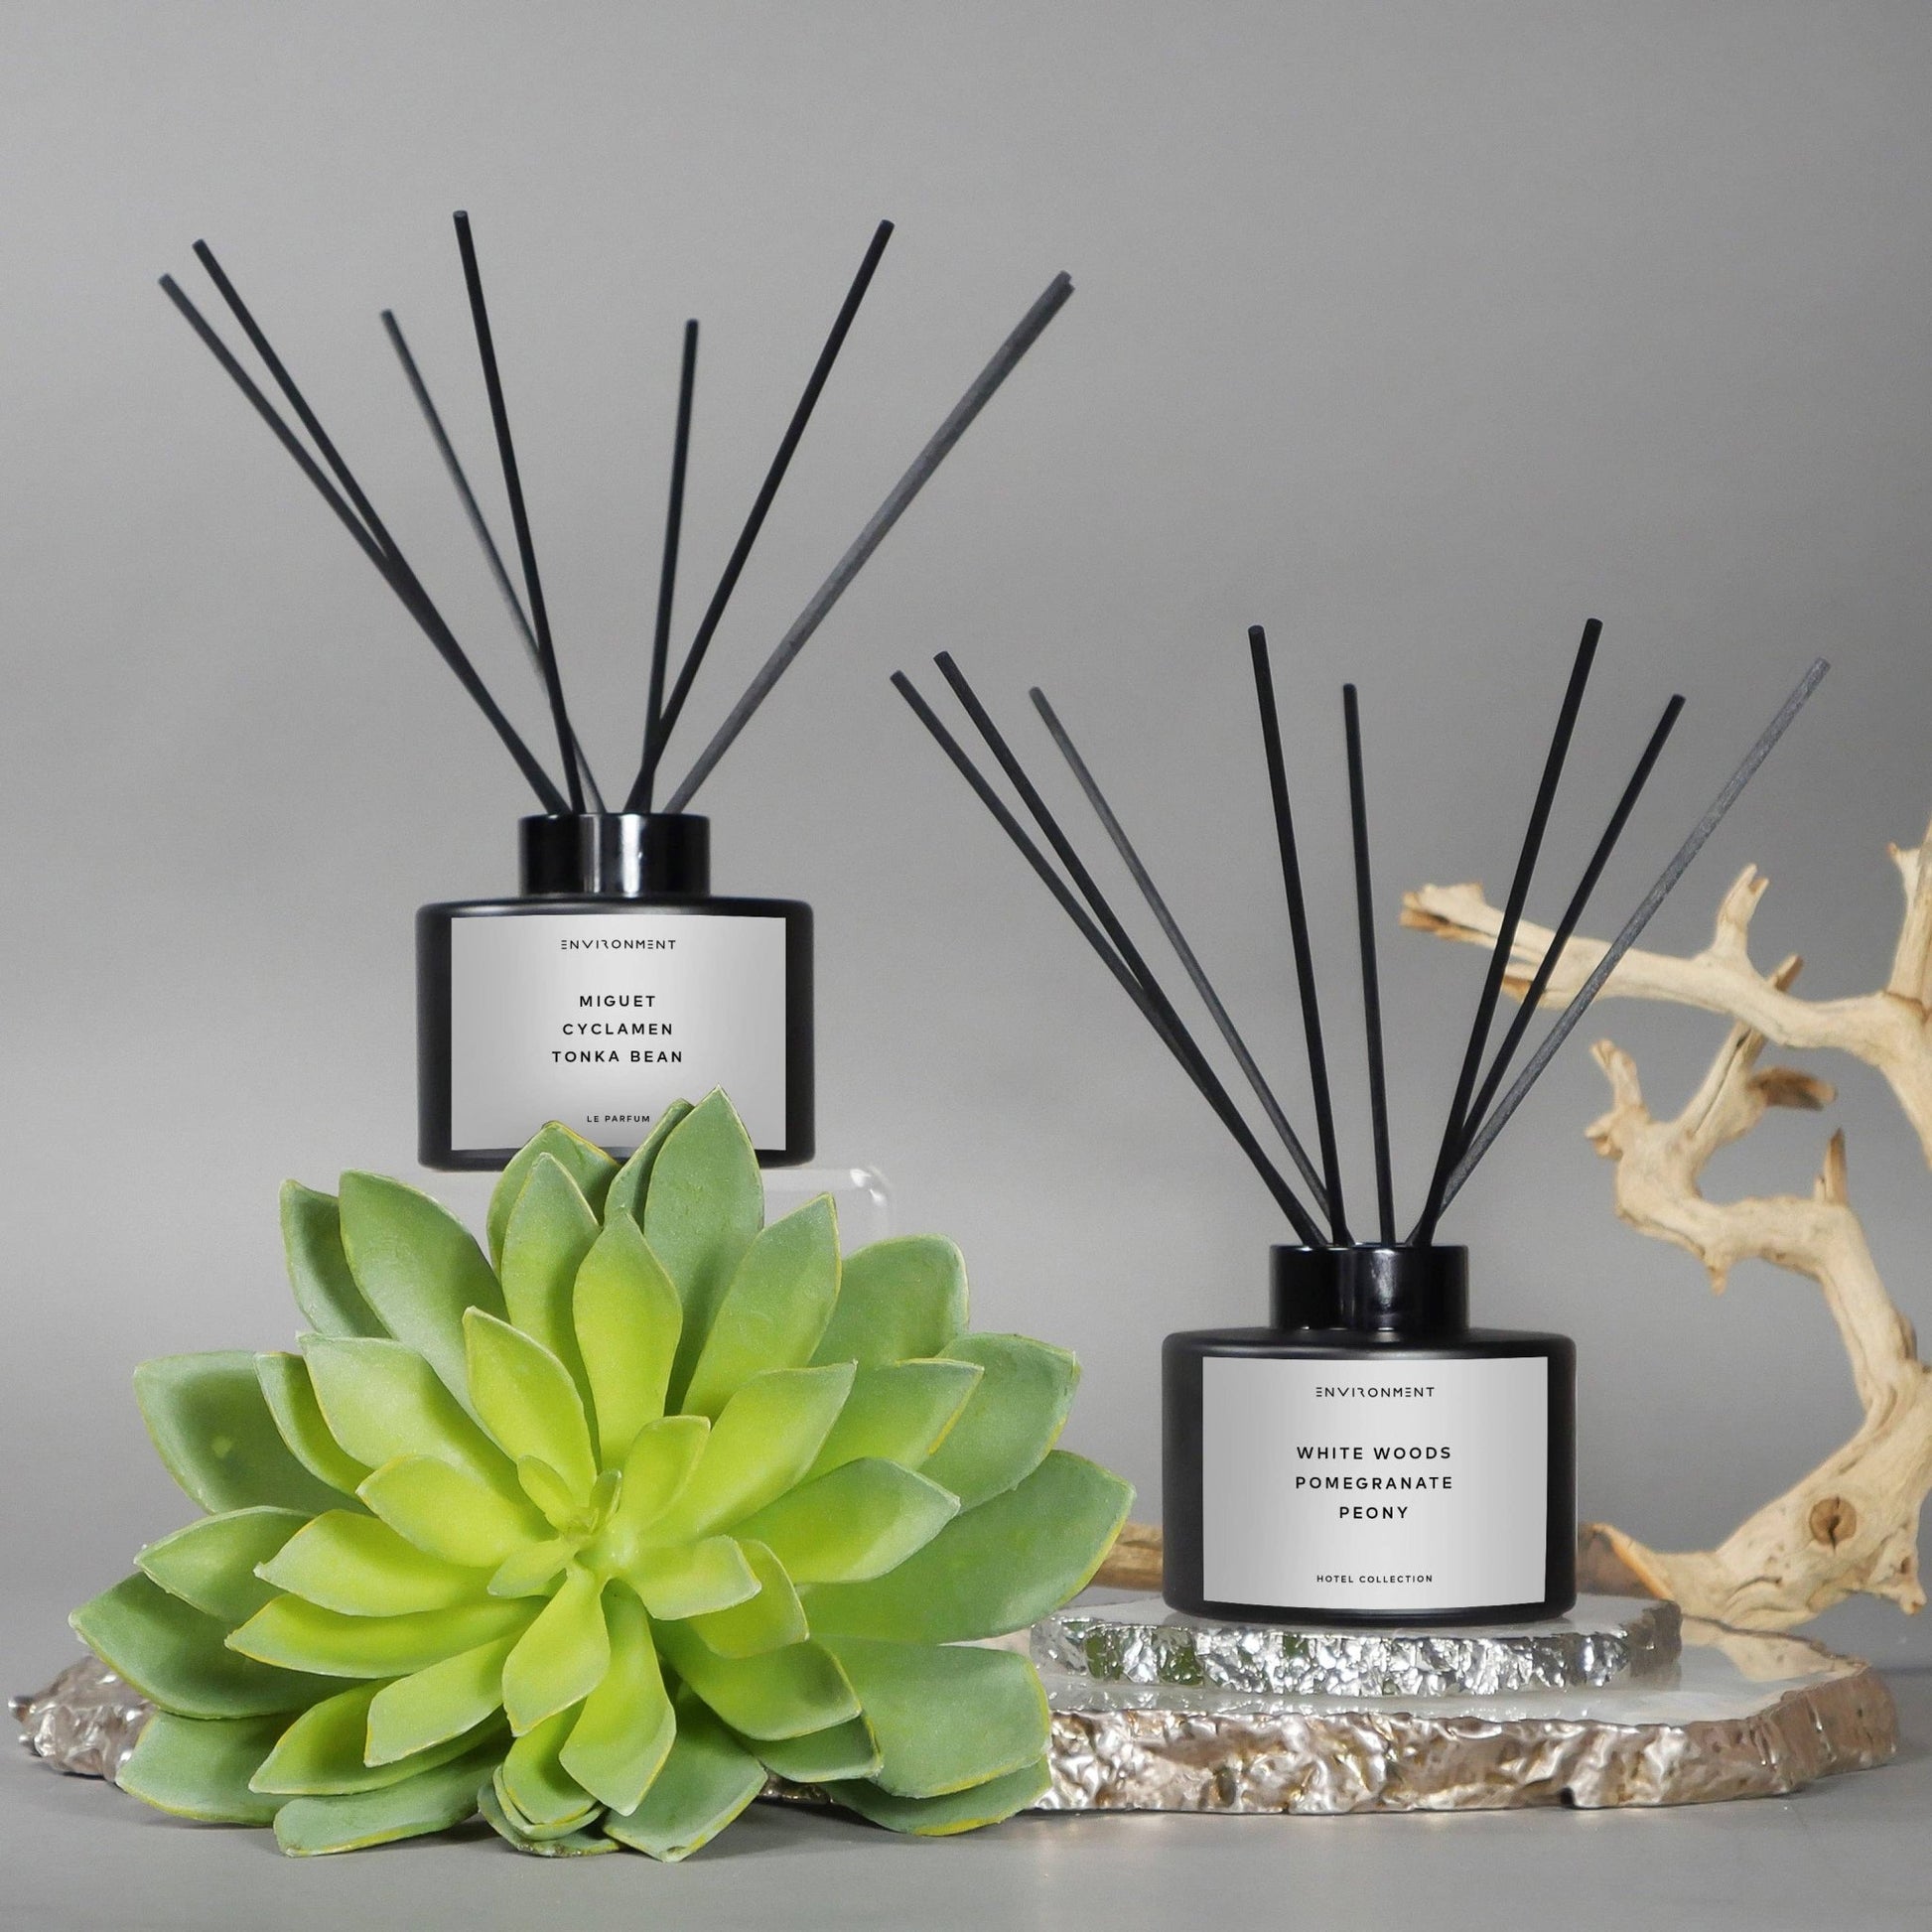 Santal | Tonka | Musk Diffuser Inspired by 1 Hotel® and Santal® - Something about Sofia